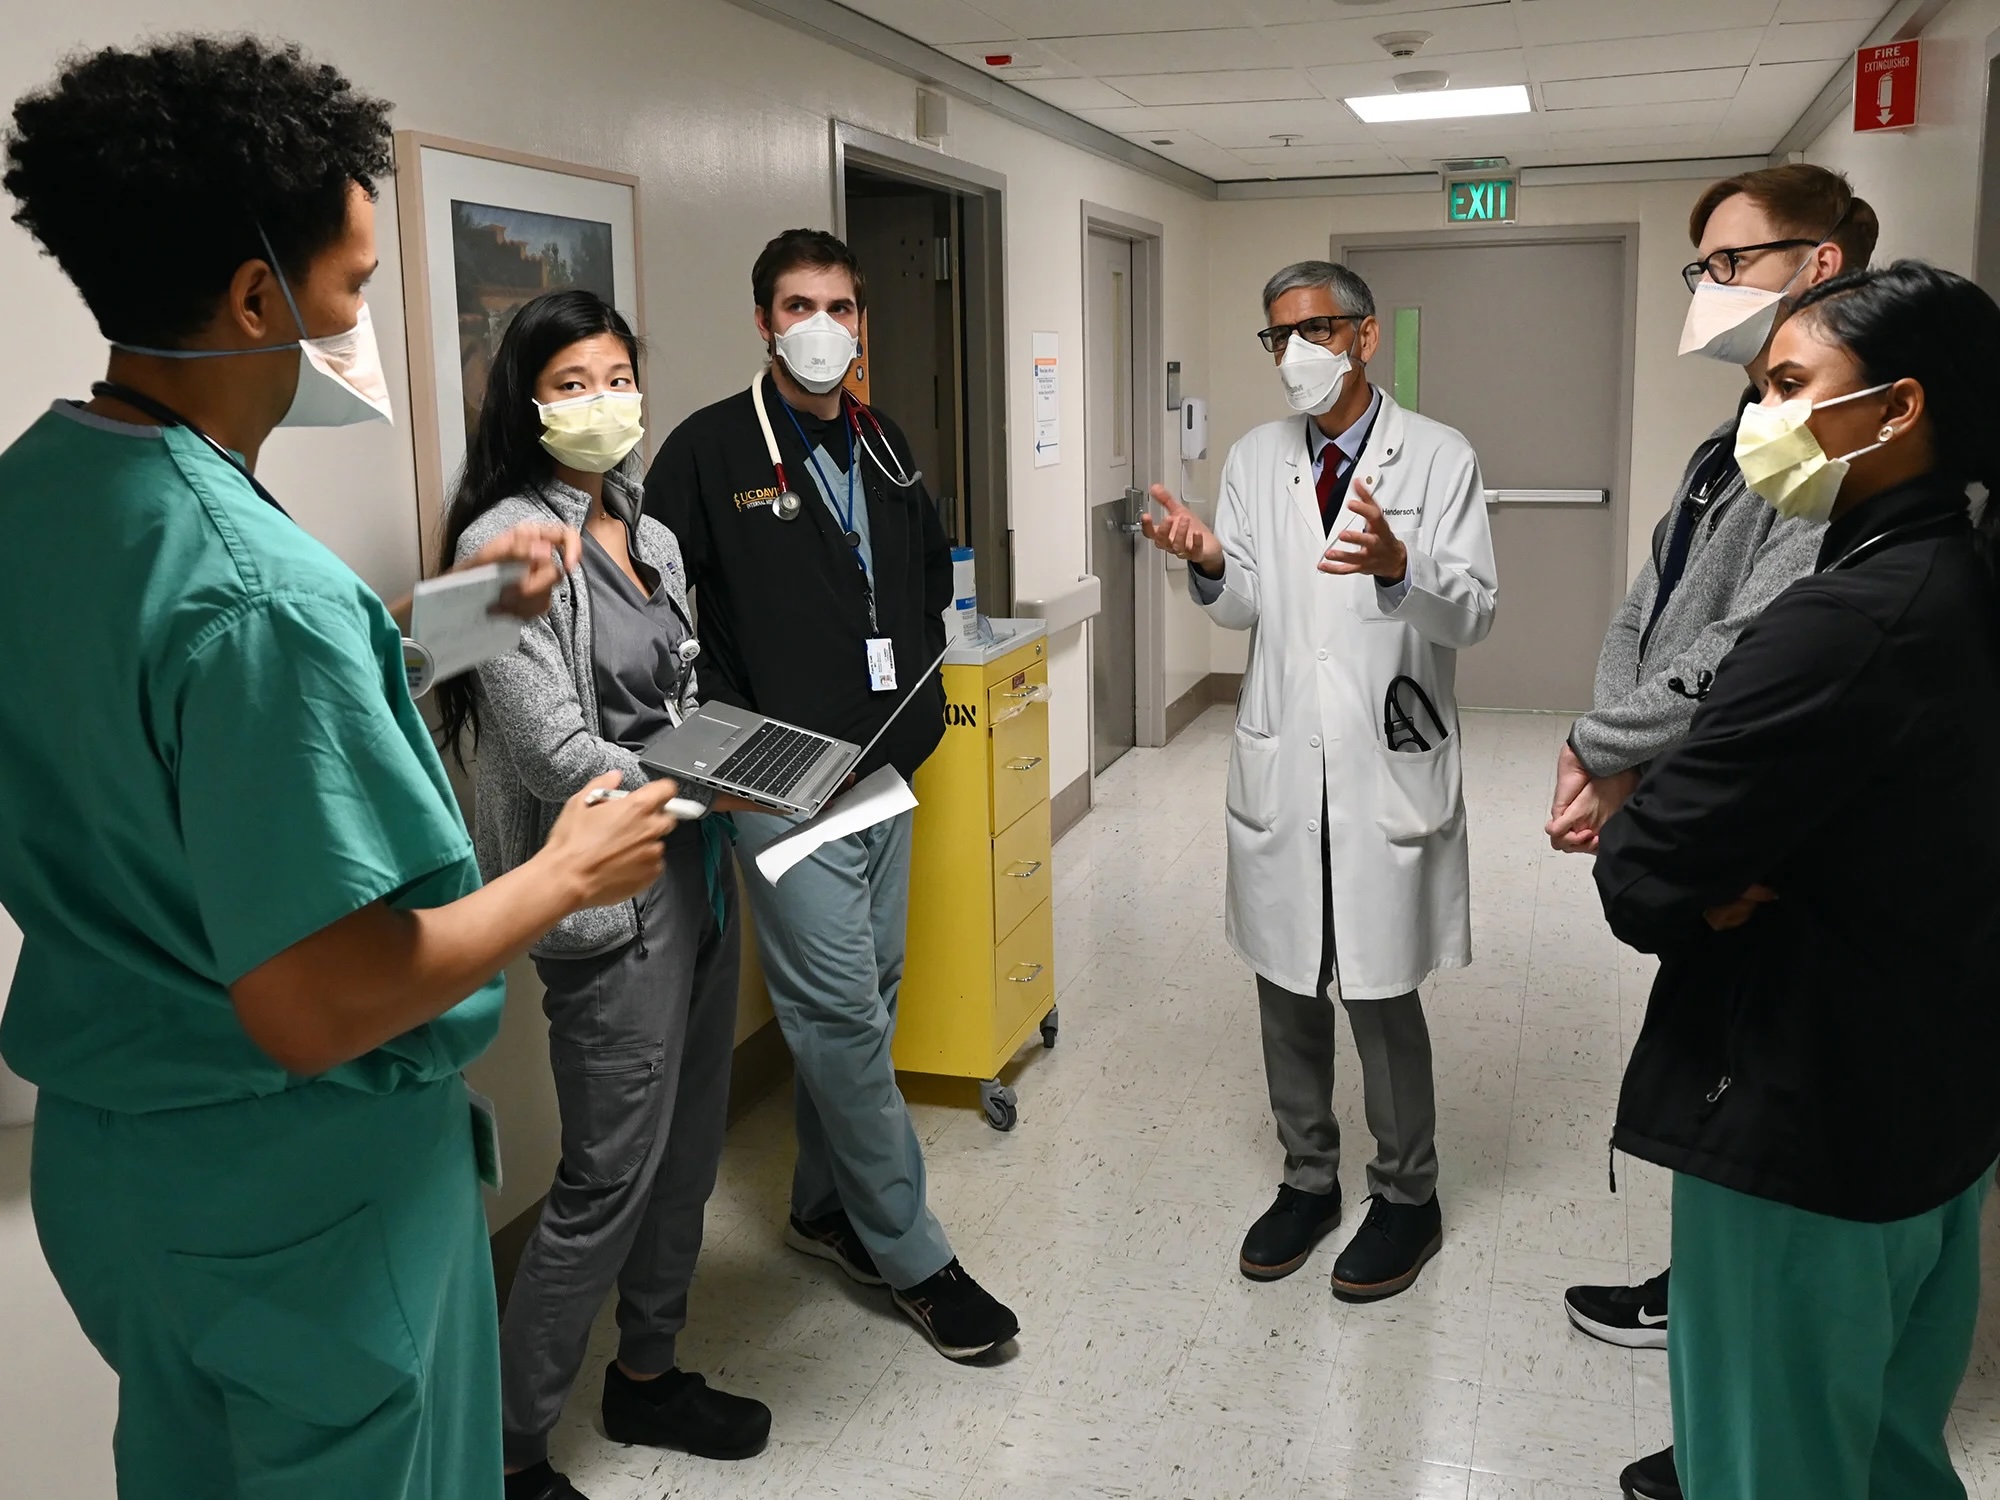 Male doctor in a white coat speaks to a group of medical students wearing scrubs in a hallway of a hospital